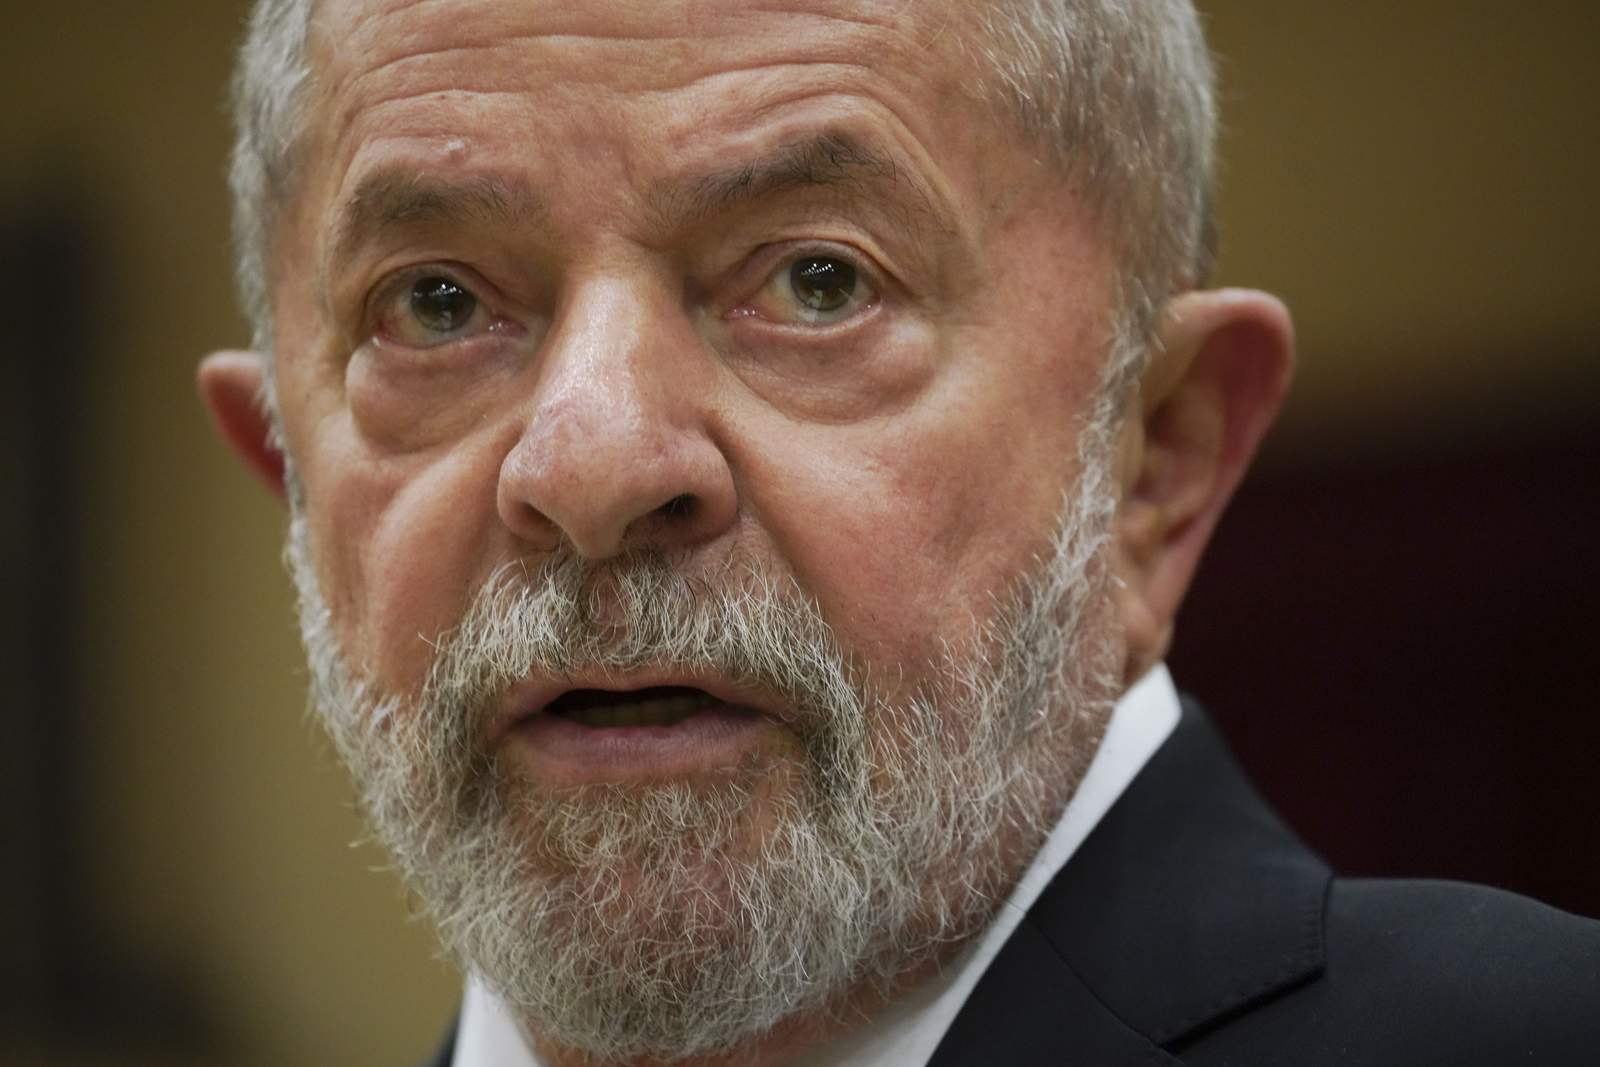 'Lula' convictions dismissed; could run again in Brazil